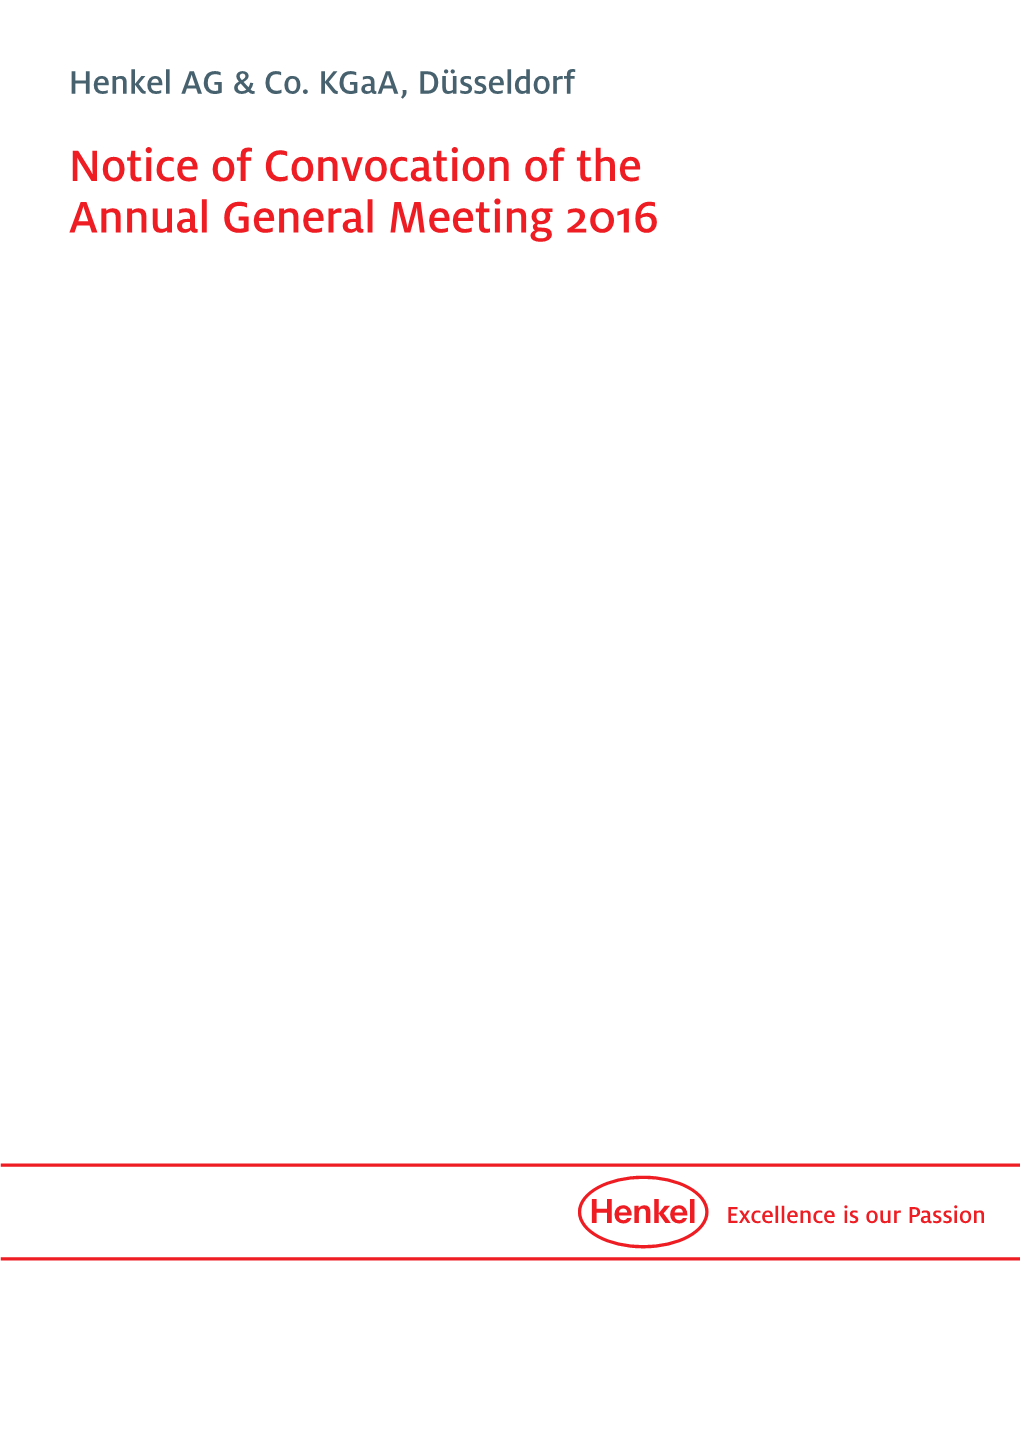 Henkel Notice of Convocation of AGM 2016